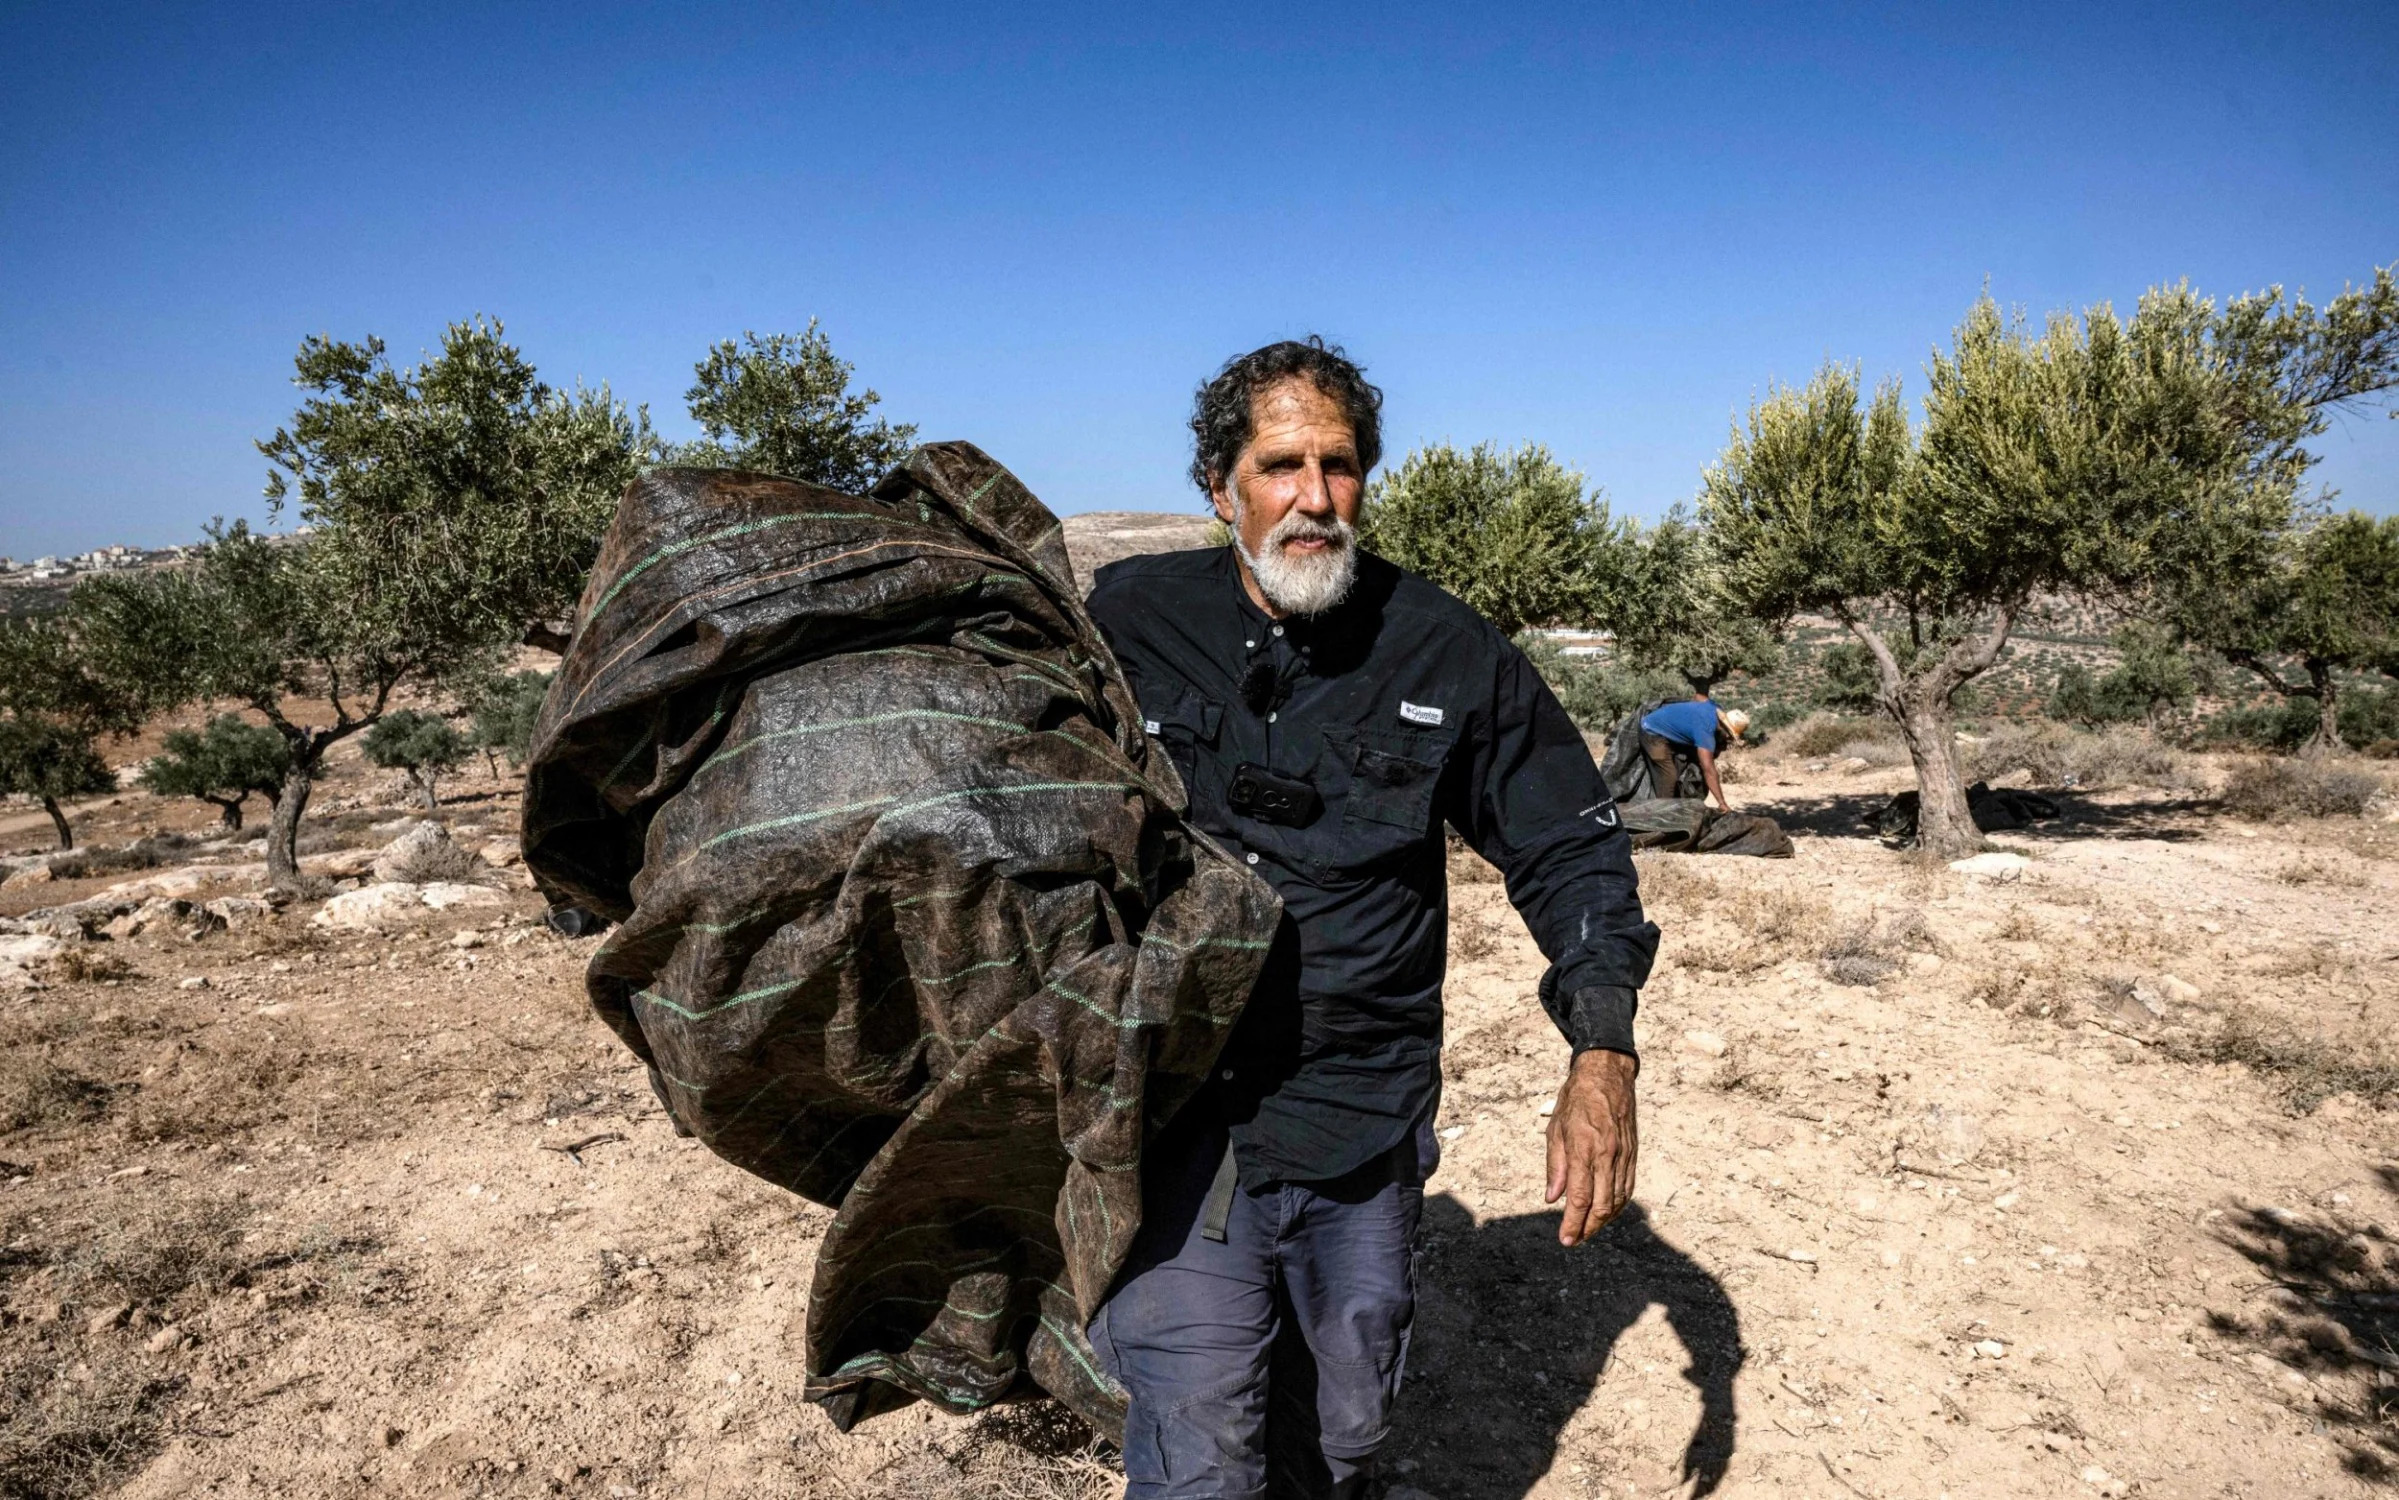 Rabbi Arik Ascherman, a member of Rabbis for Human Rights, helps Palestinians during the olive harvest outside Ramallah in the West Bank